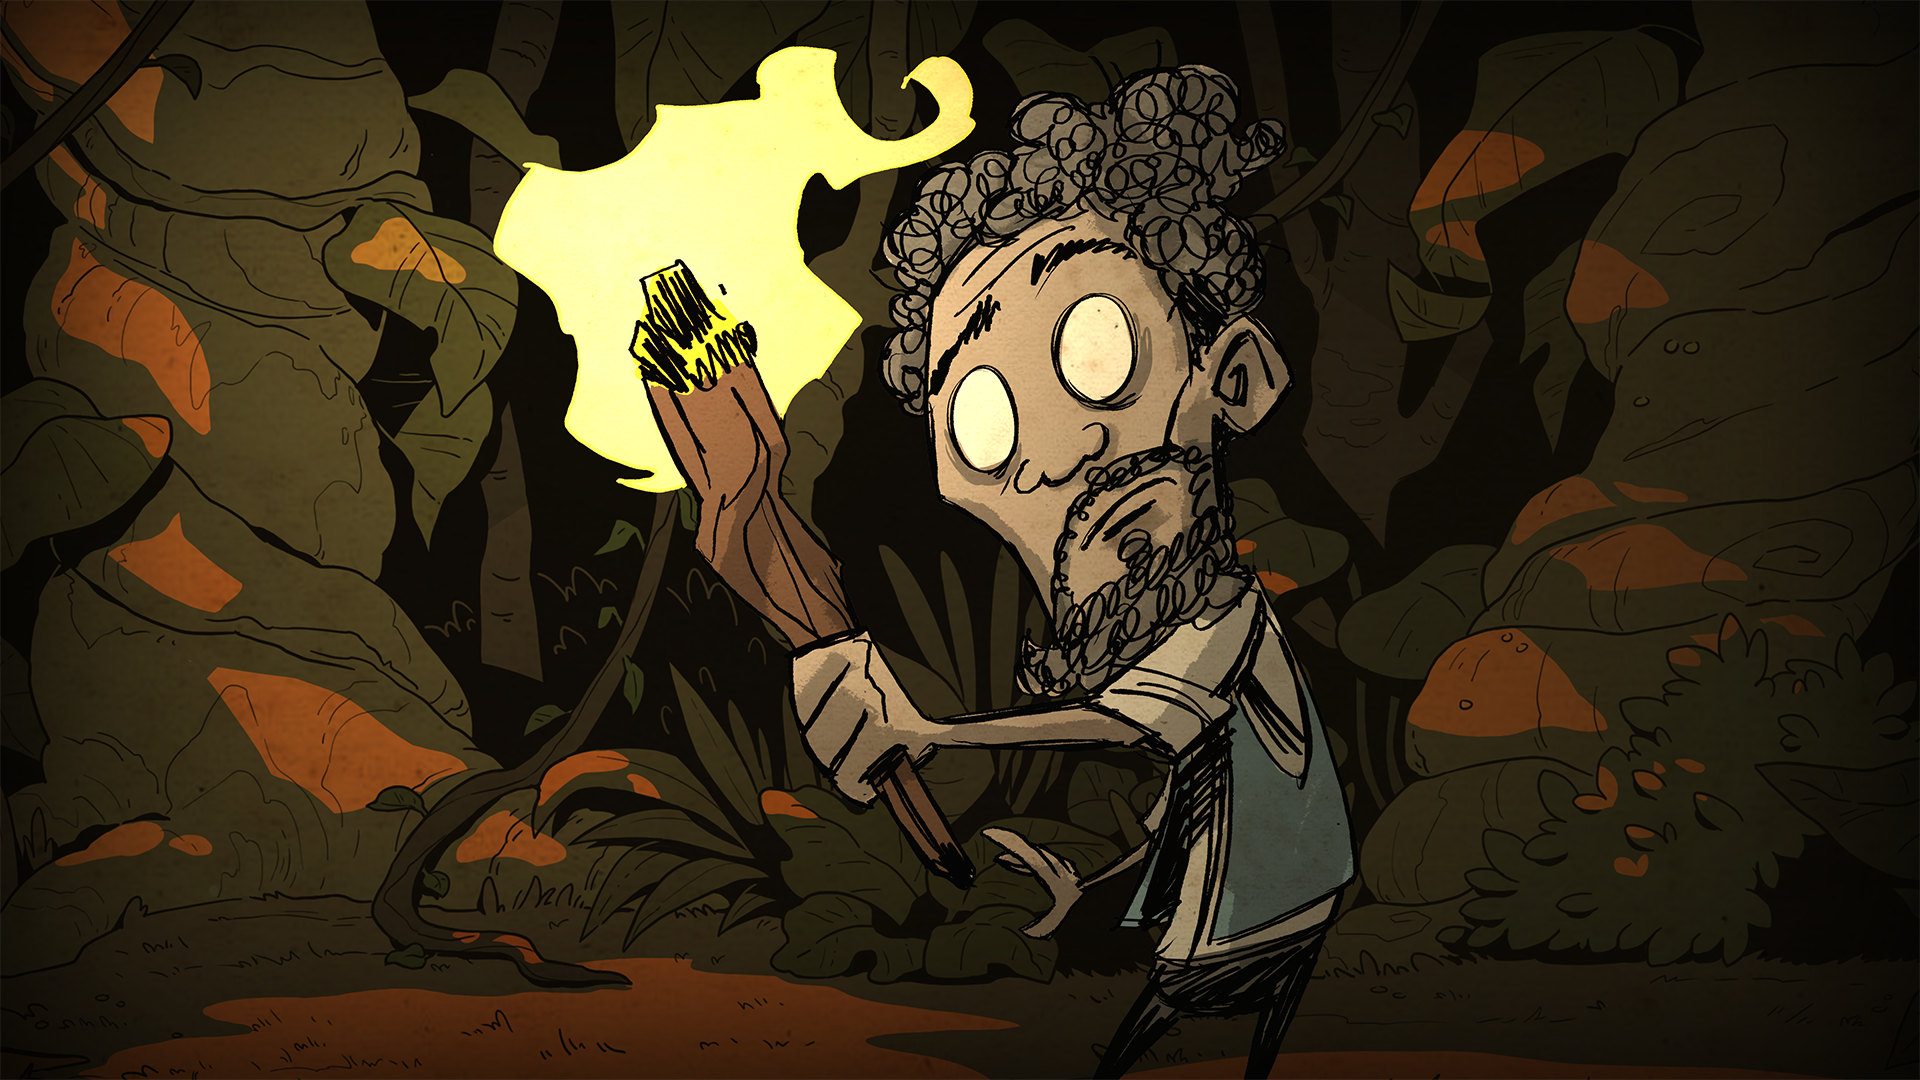 Варли донт старв. Don't Starve together Варли. Варли don't Starve арт. ДСТ don't Starve together. Dont que